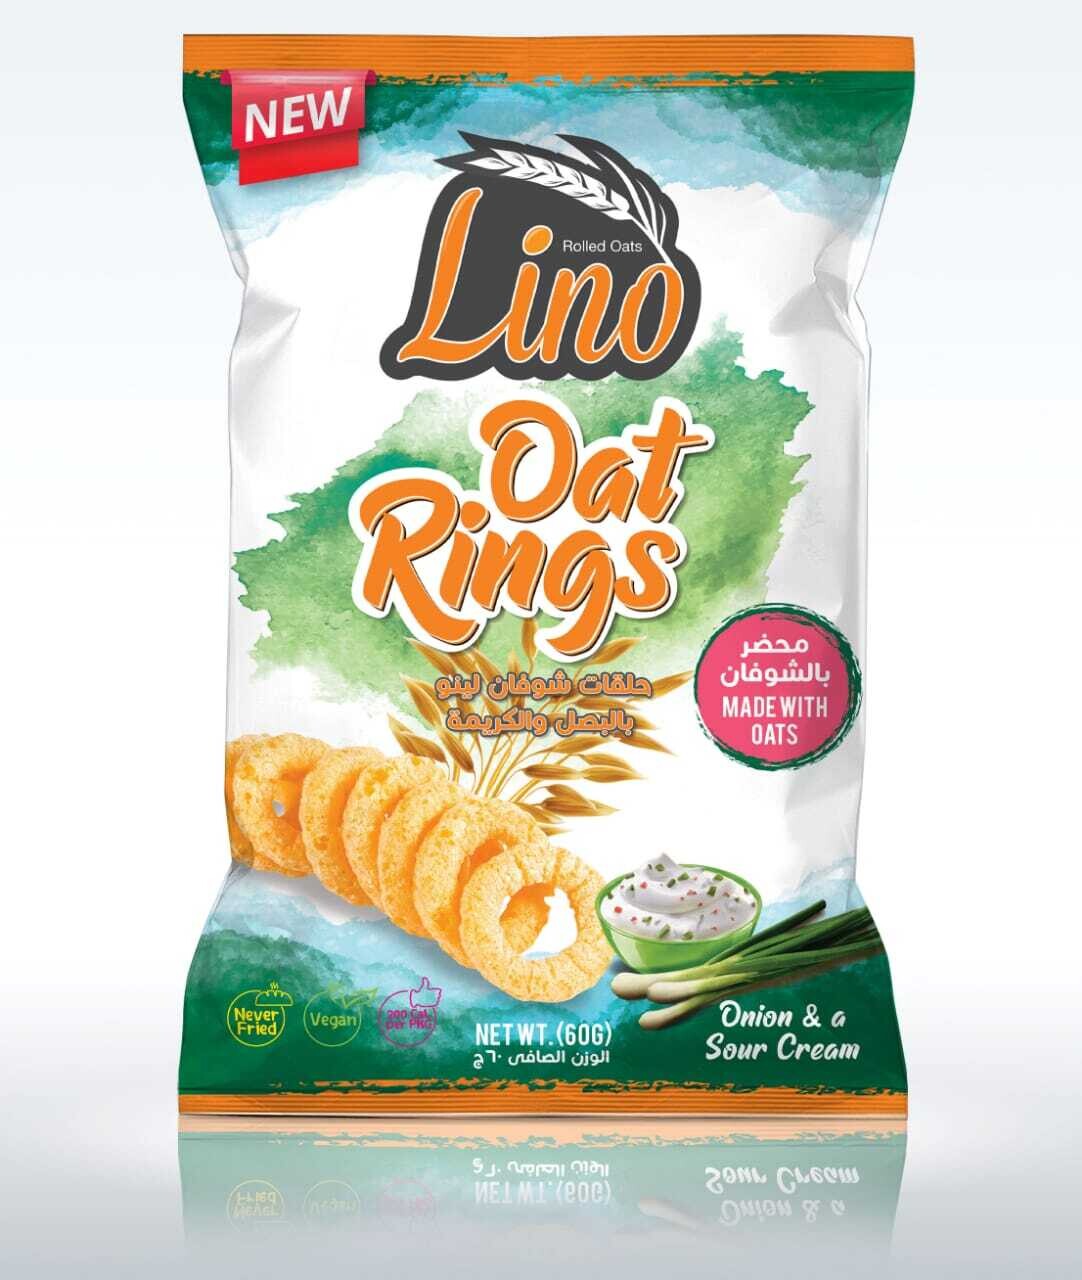 Lino Oat Rings with sour cream and onion 60g